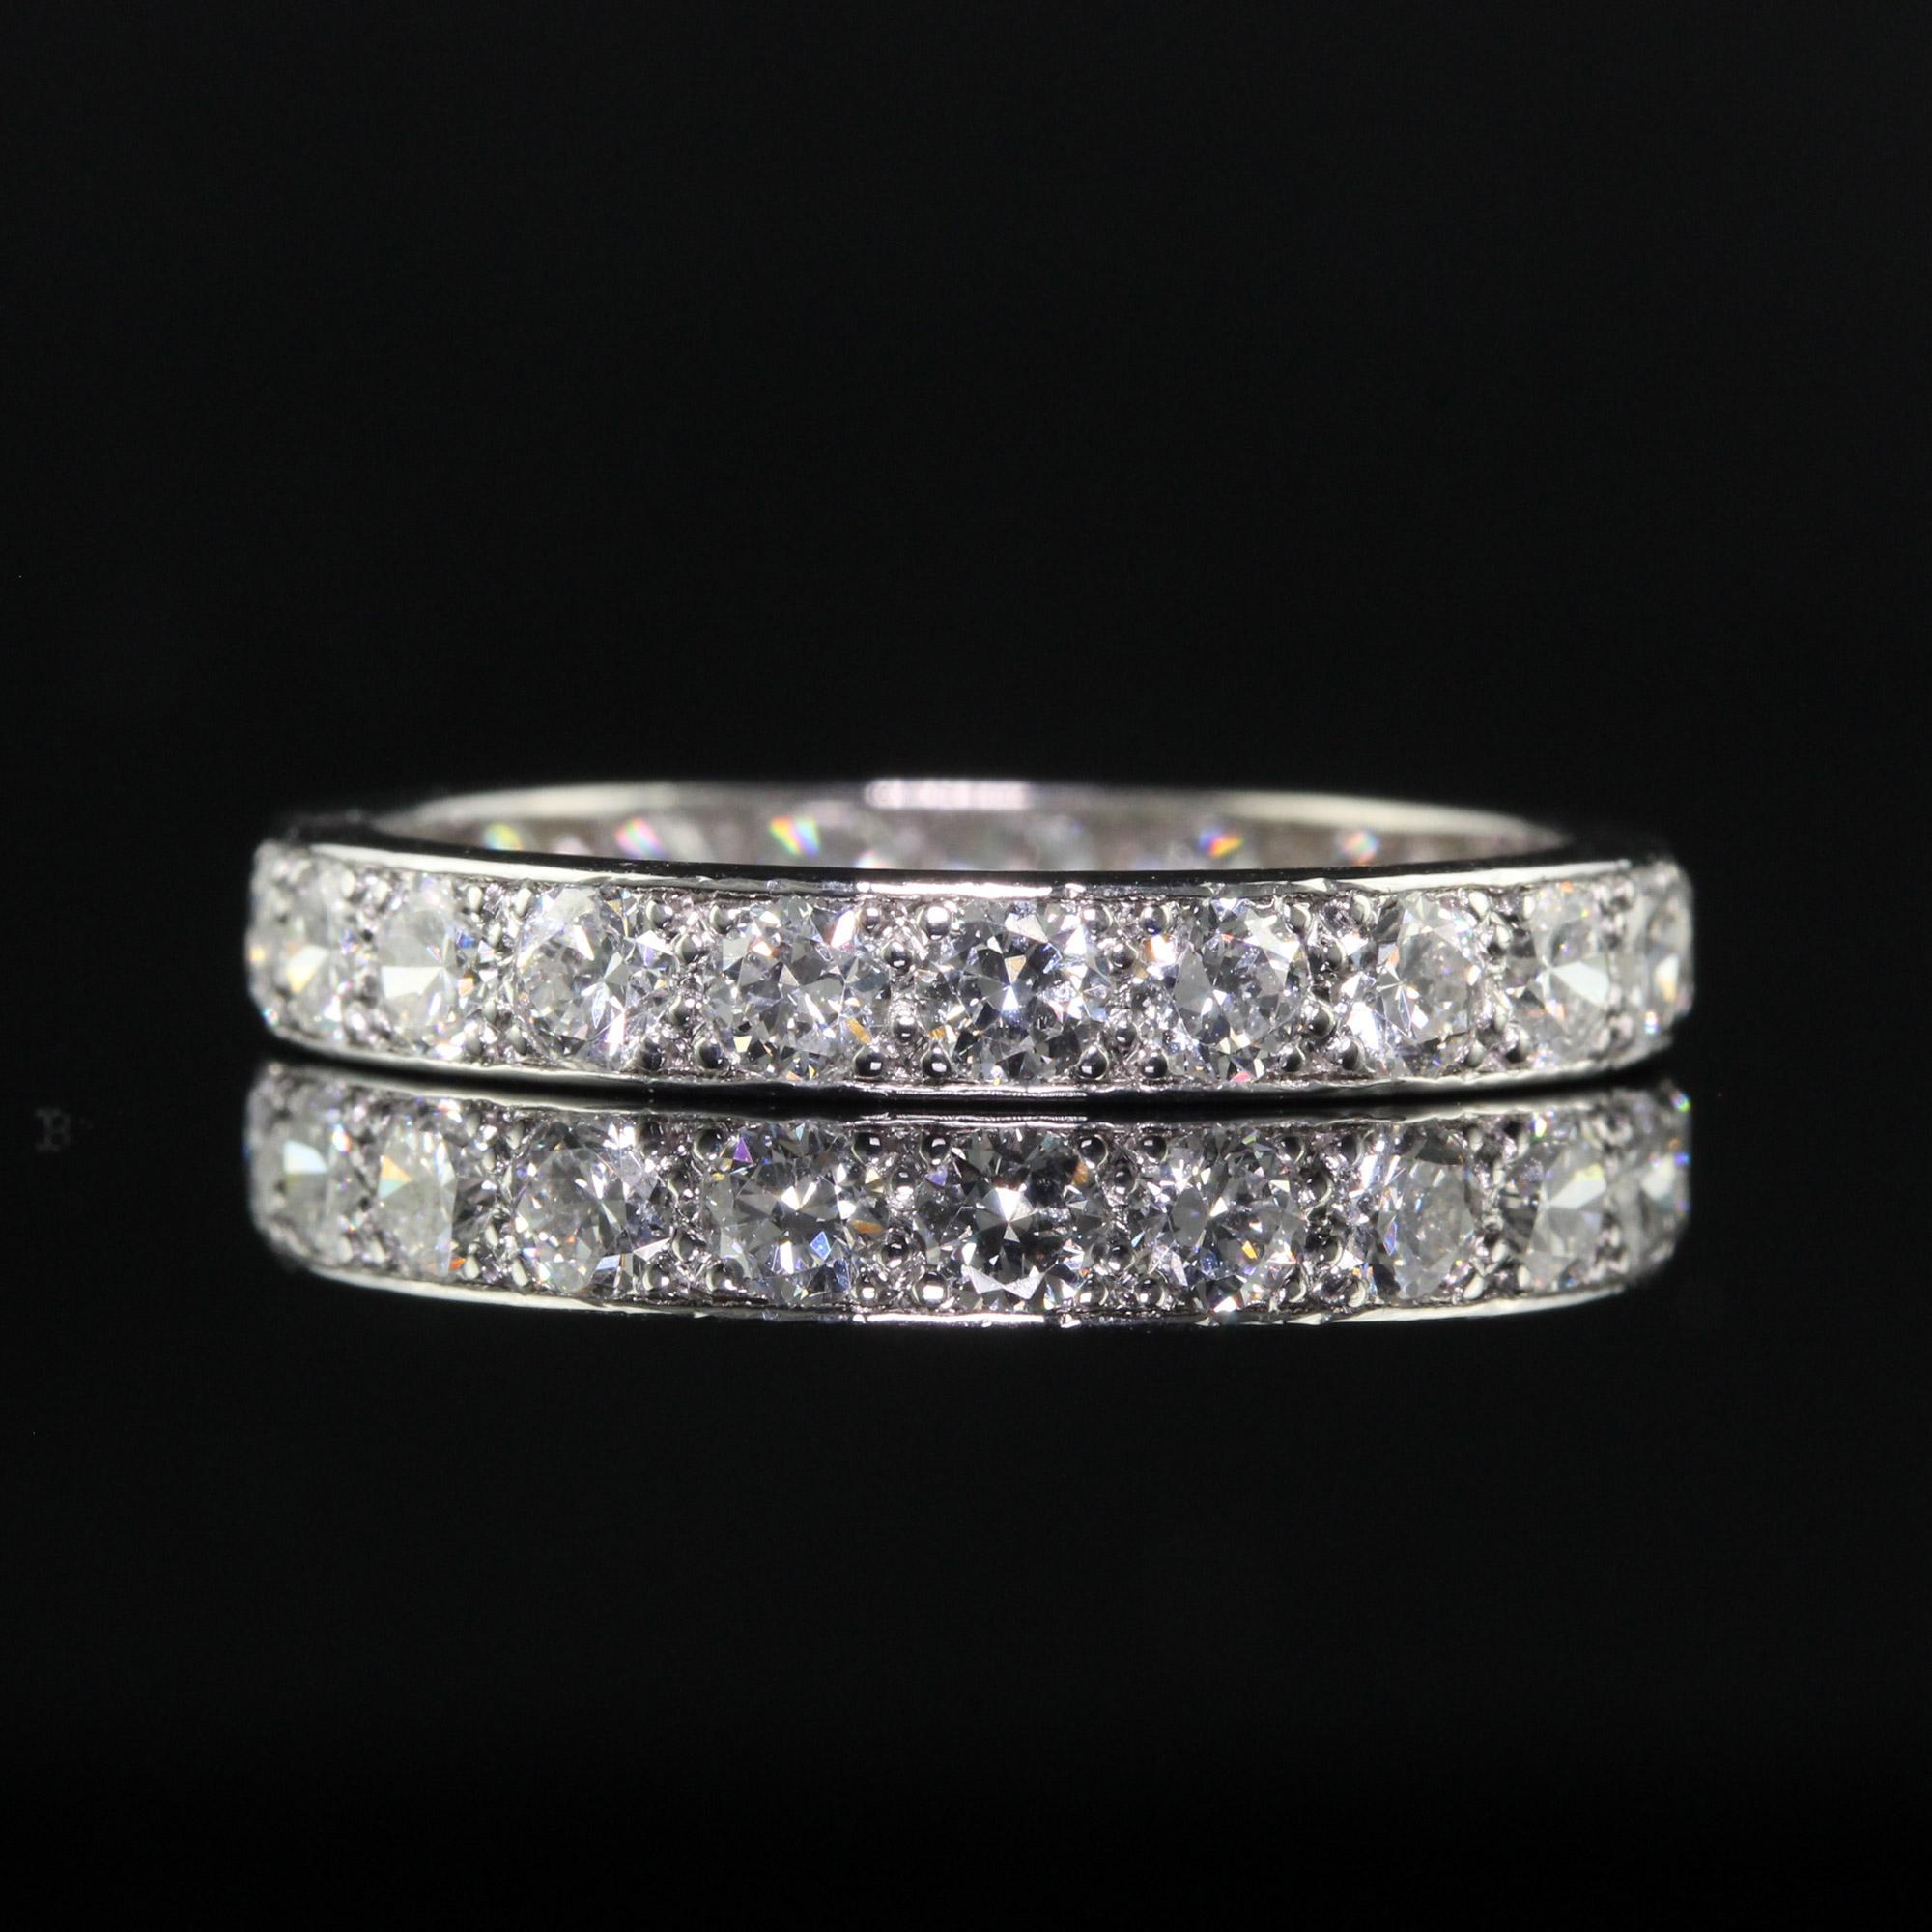 Antique Art Deco Platinum Old European Diamond Eternity Band - Size 5 3/4 In Good Condition For Sale In Great Neck, NY